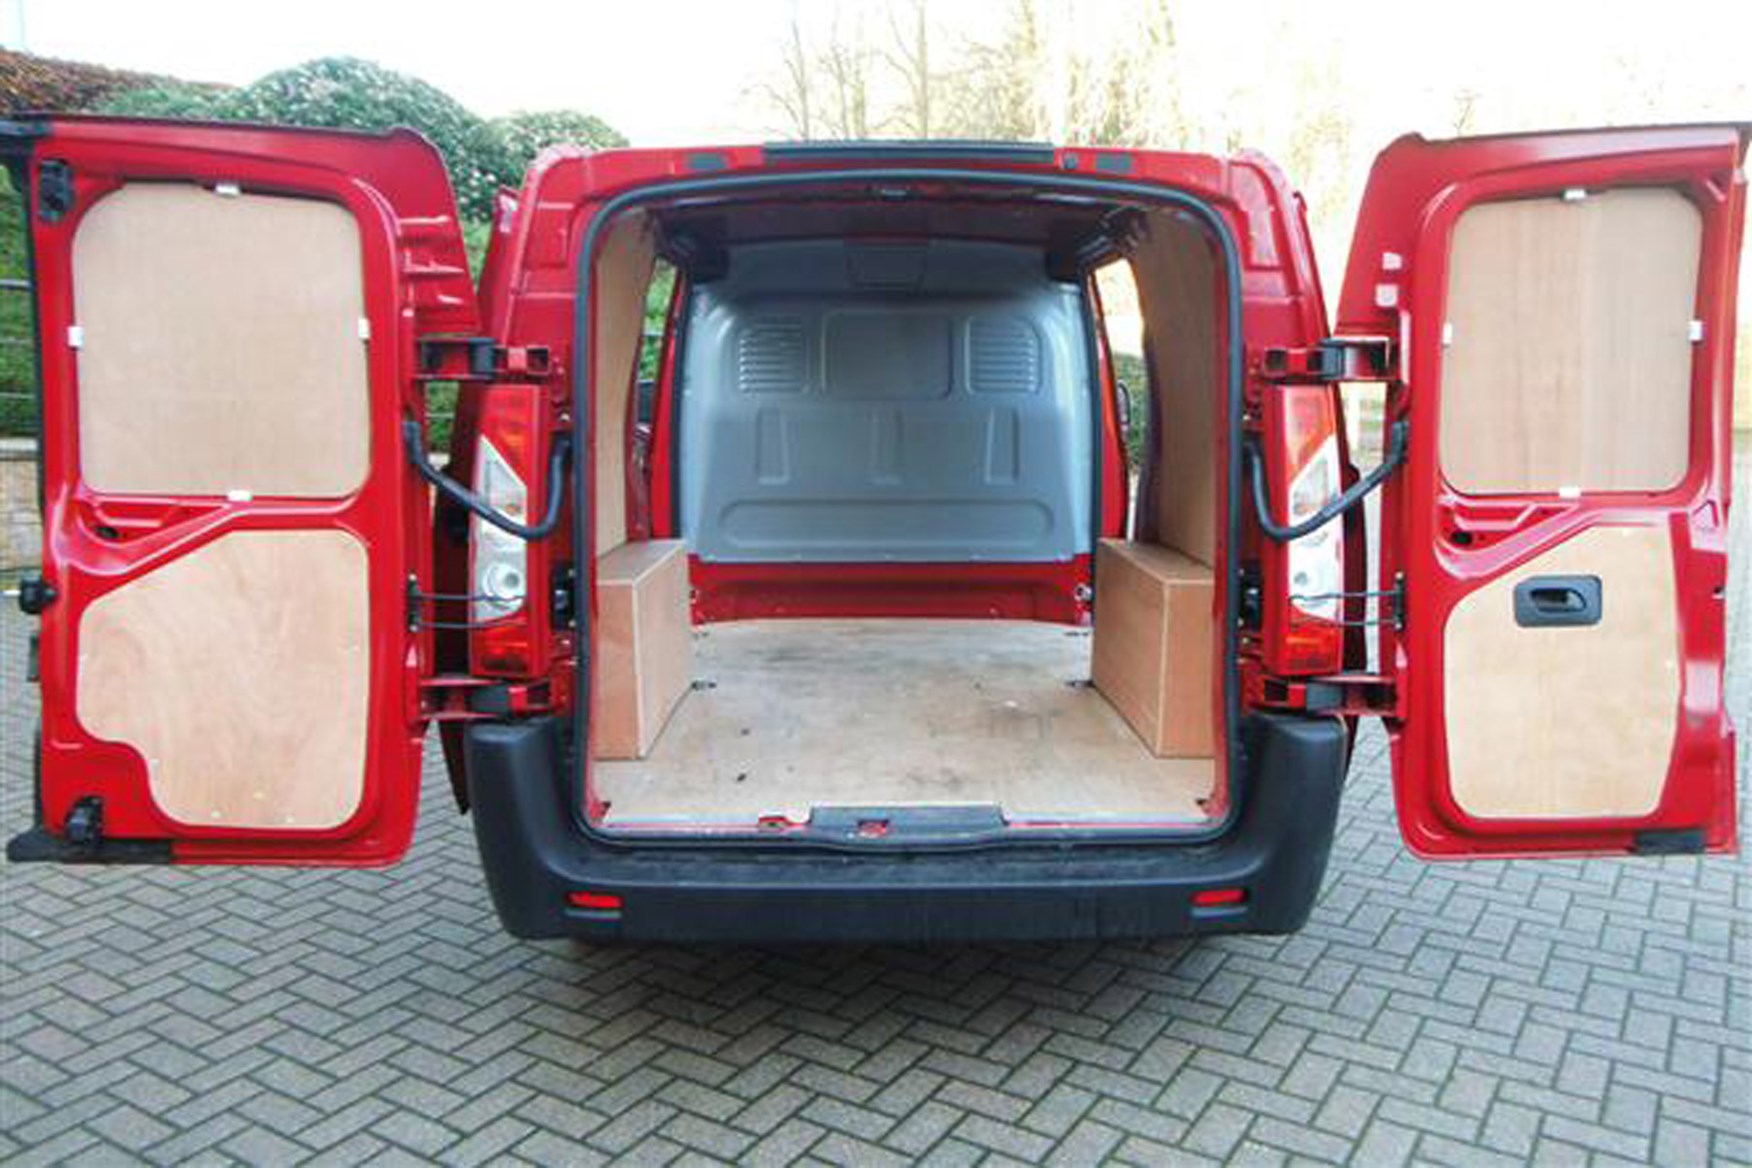 Toyota Proace review on Parkers Vans - load area